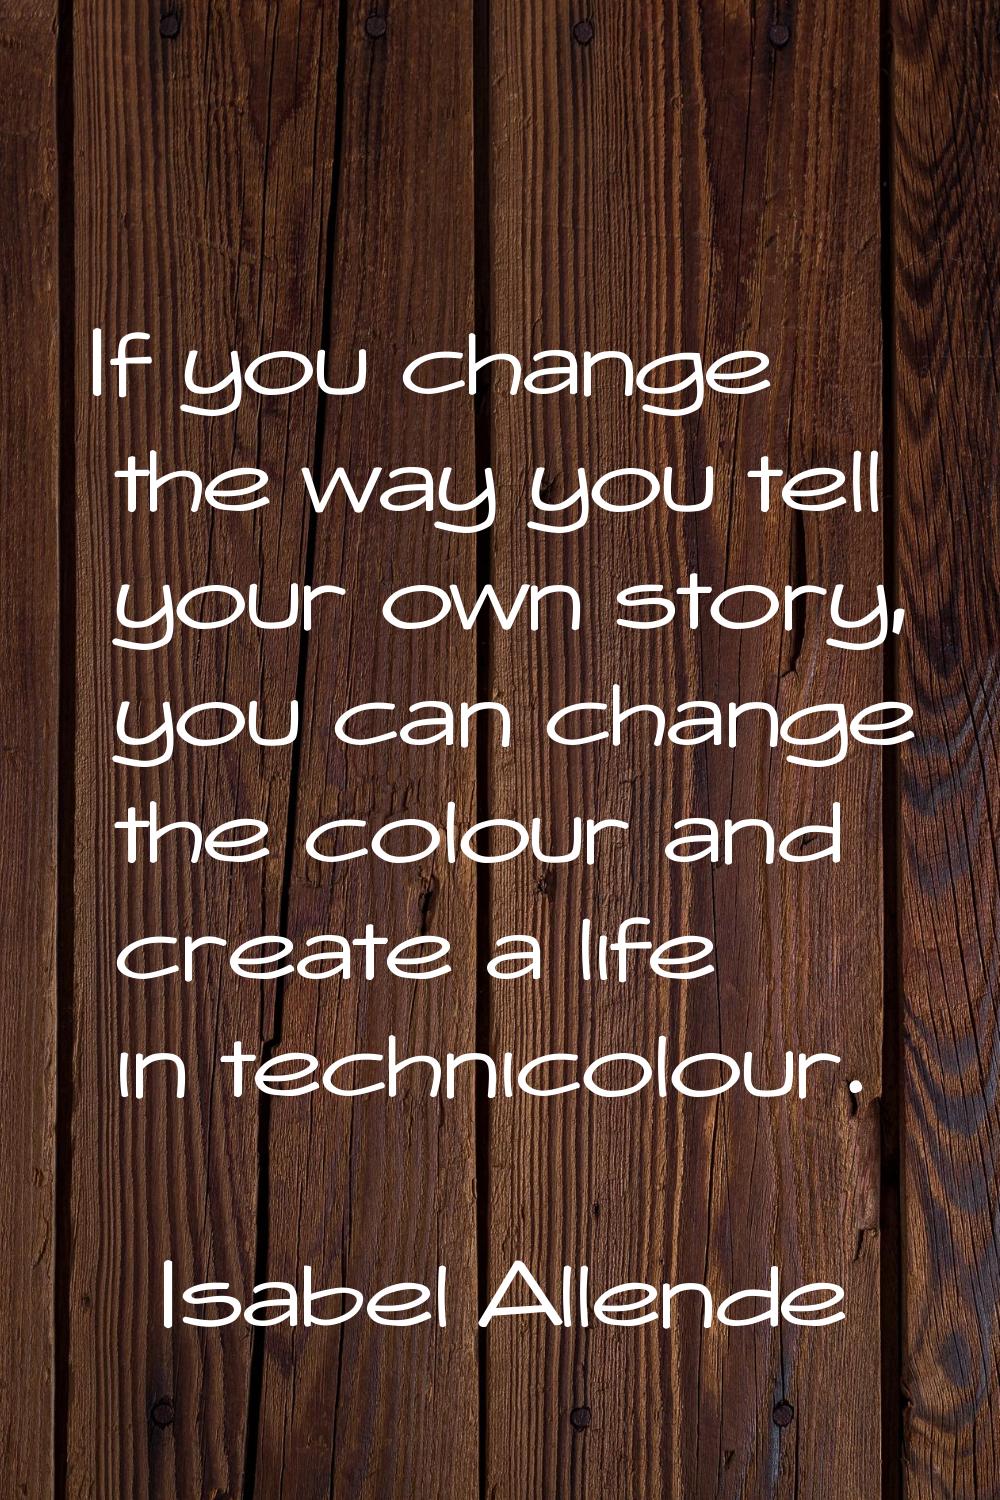 If you change the way you tell your own story, you can change the colour and create a life in techn